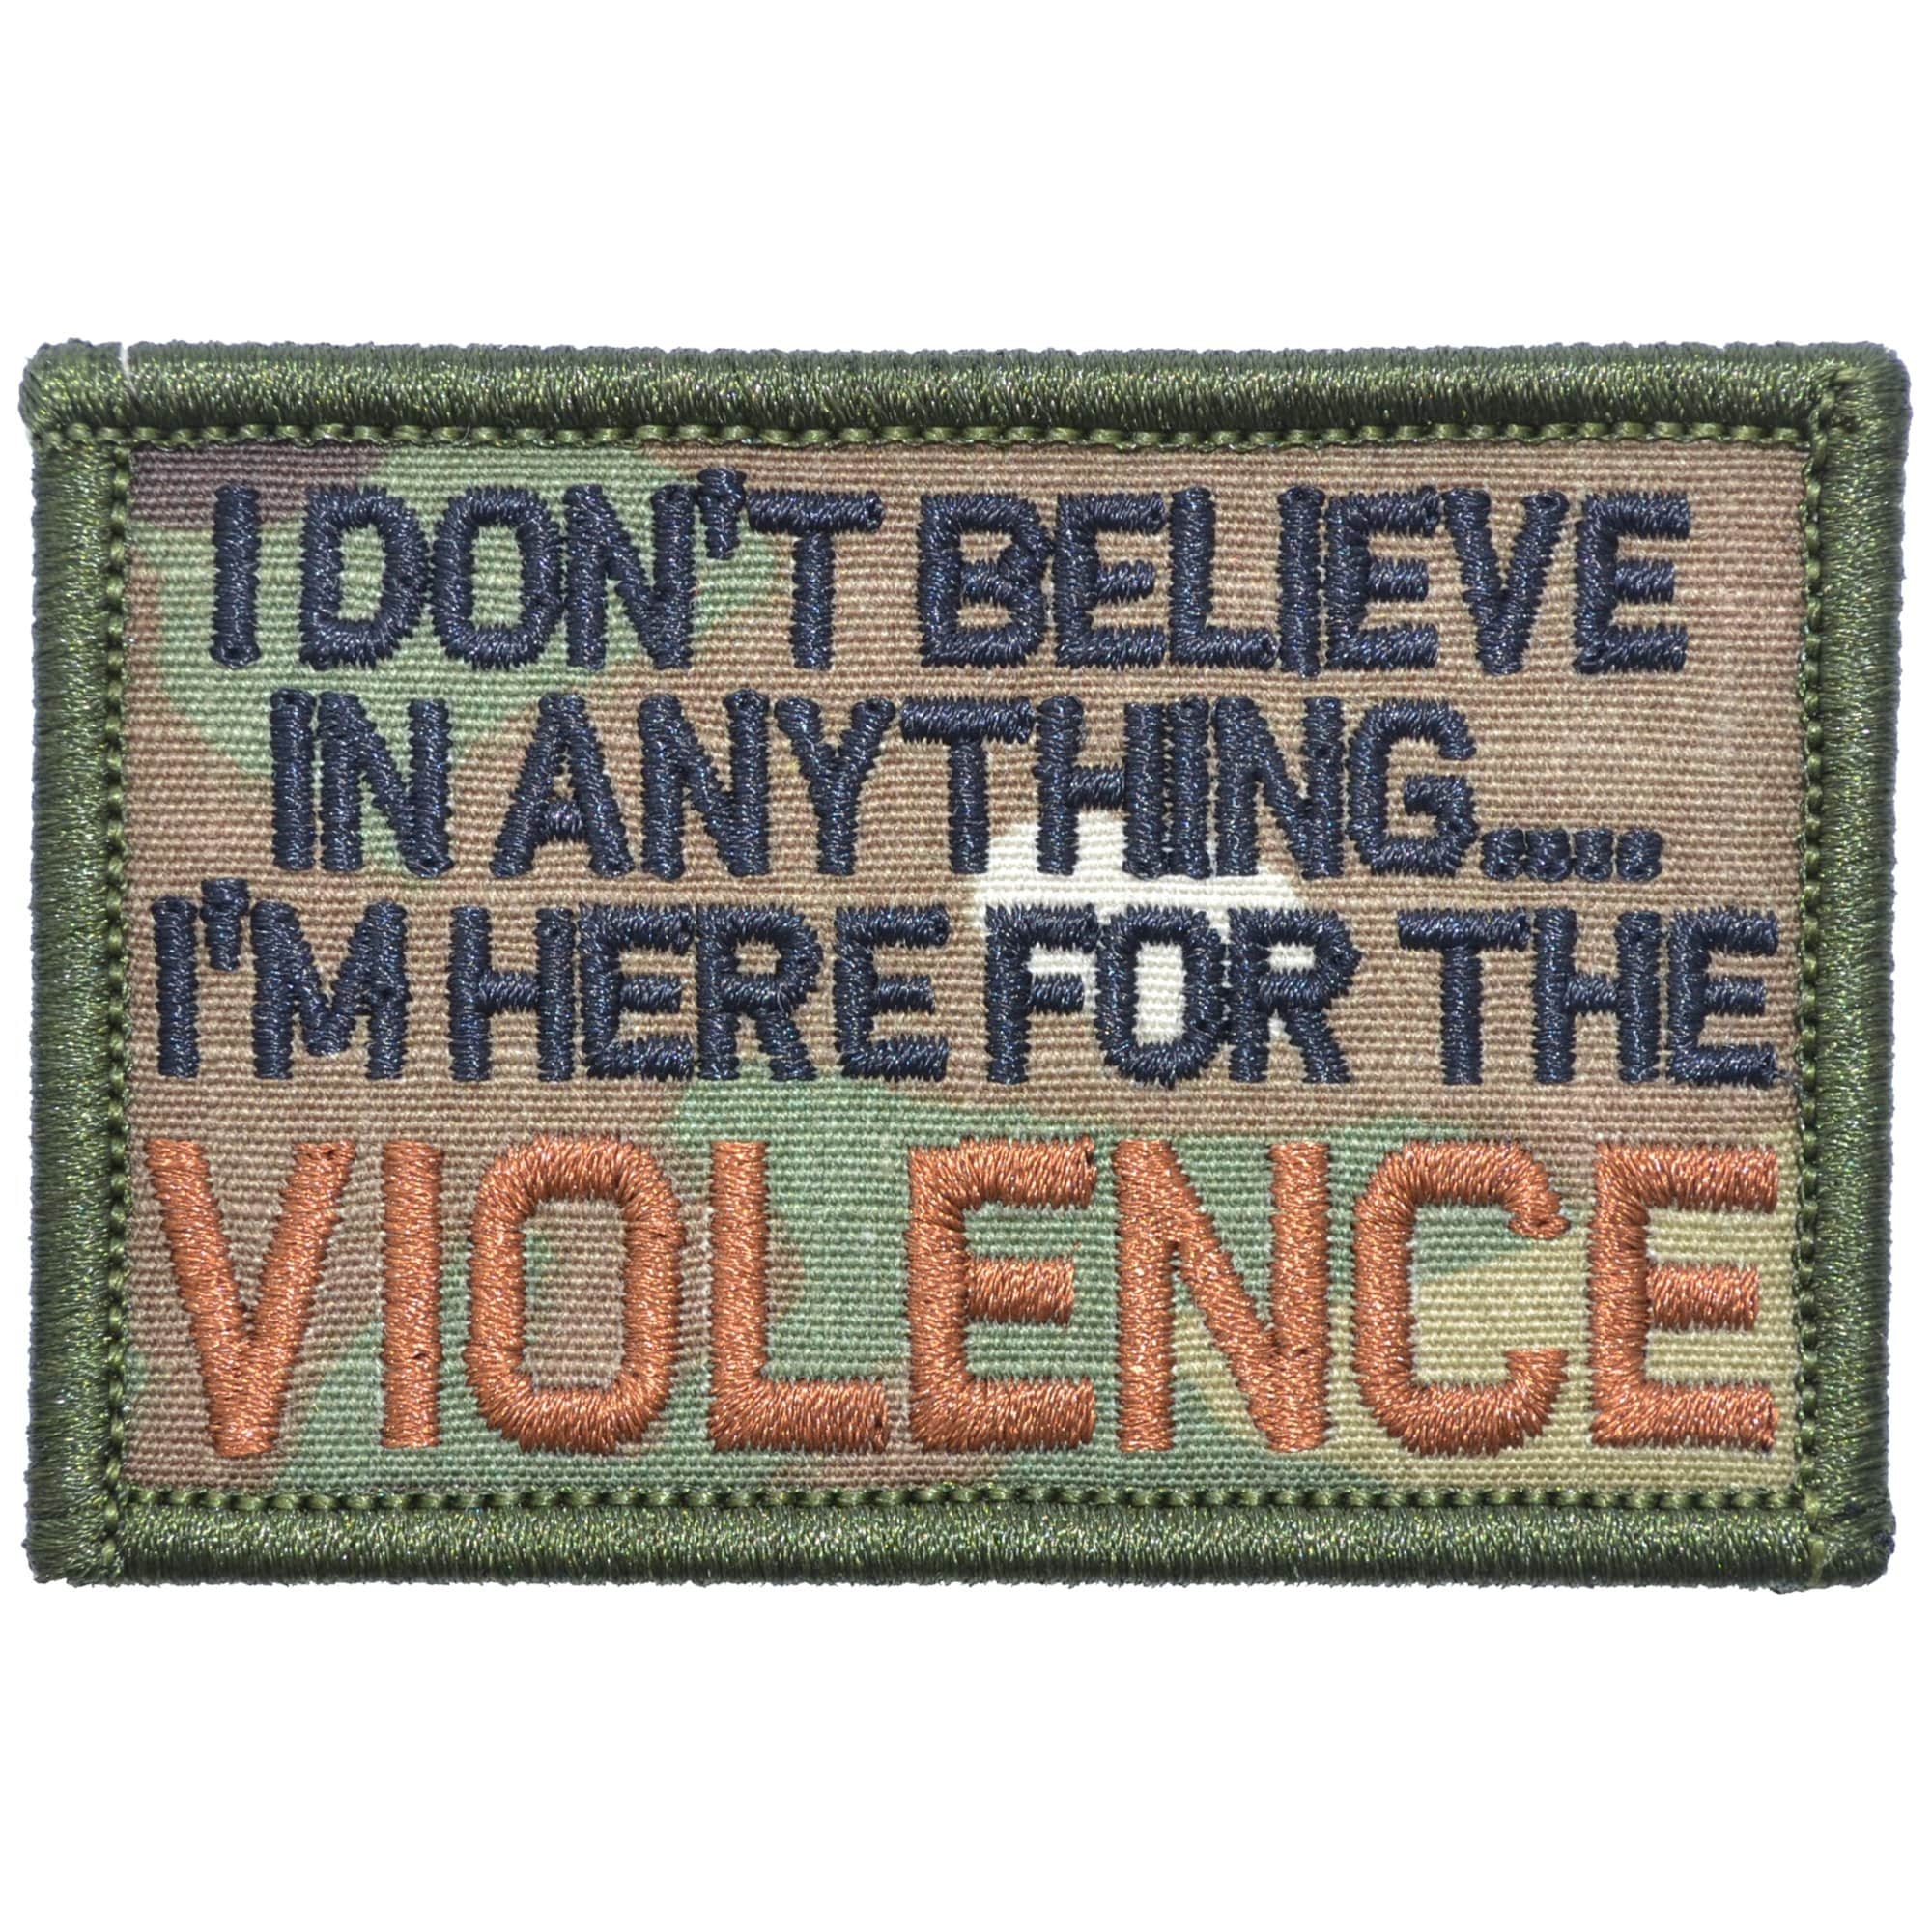 Tactical Gear Junkie Patches MultiCam I Don't Believe In Anything... I'm Here for the Violence - 2x3 Patch